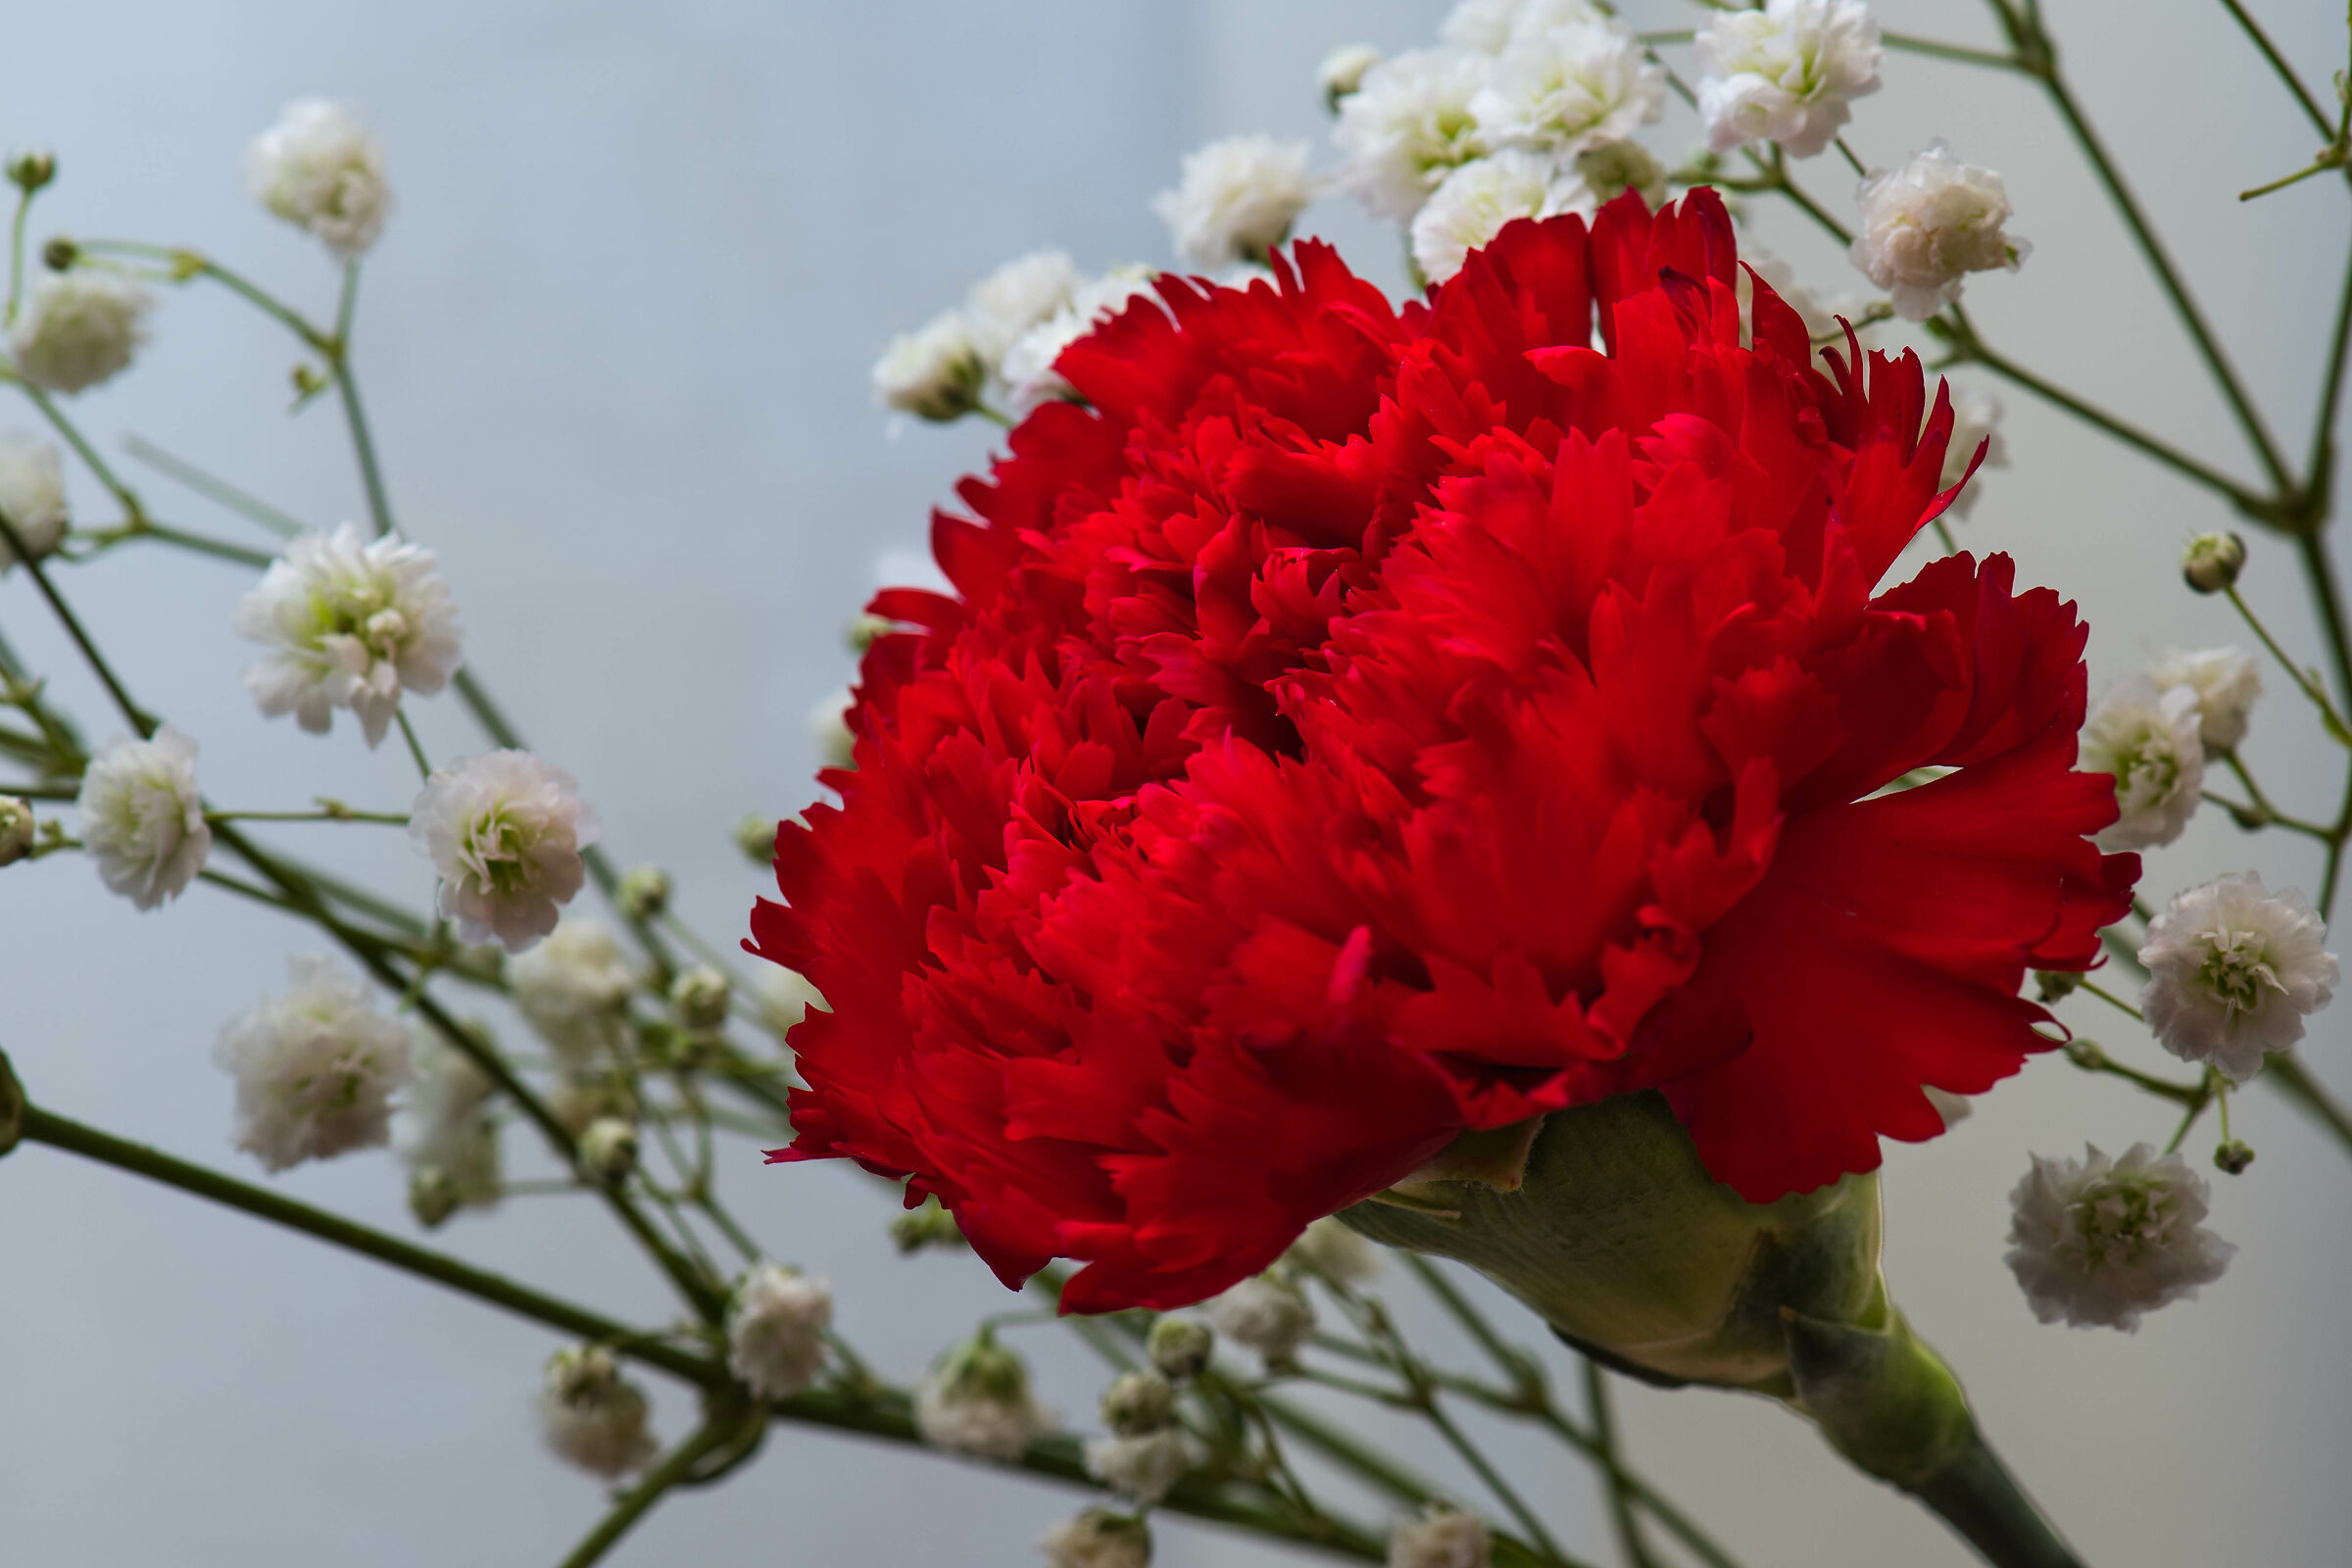 A red carnation in the middle of winter...